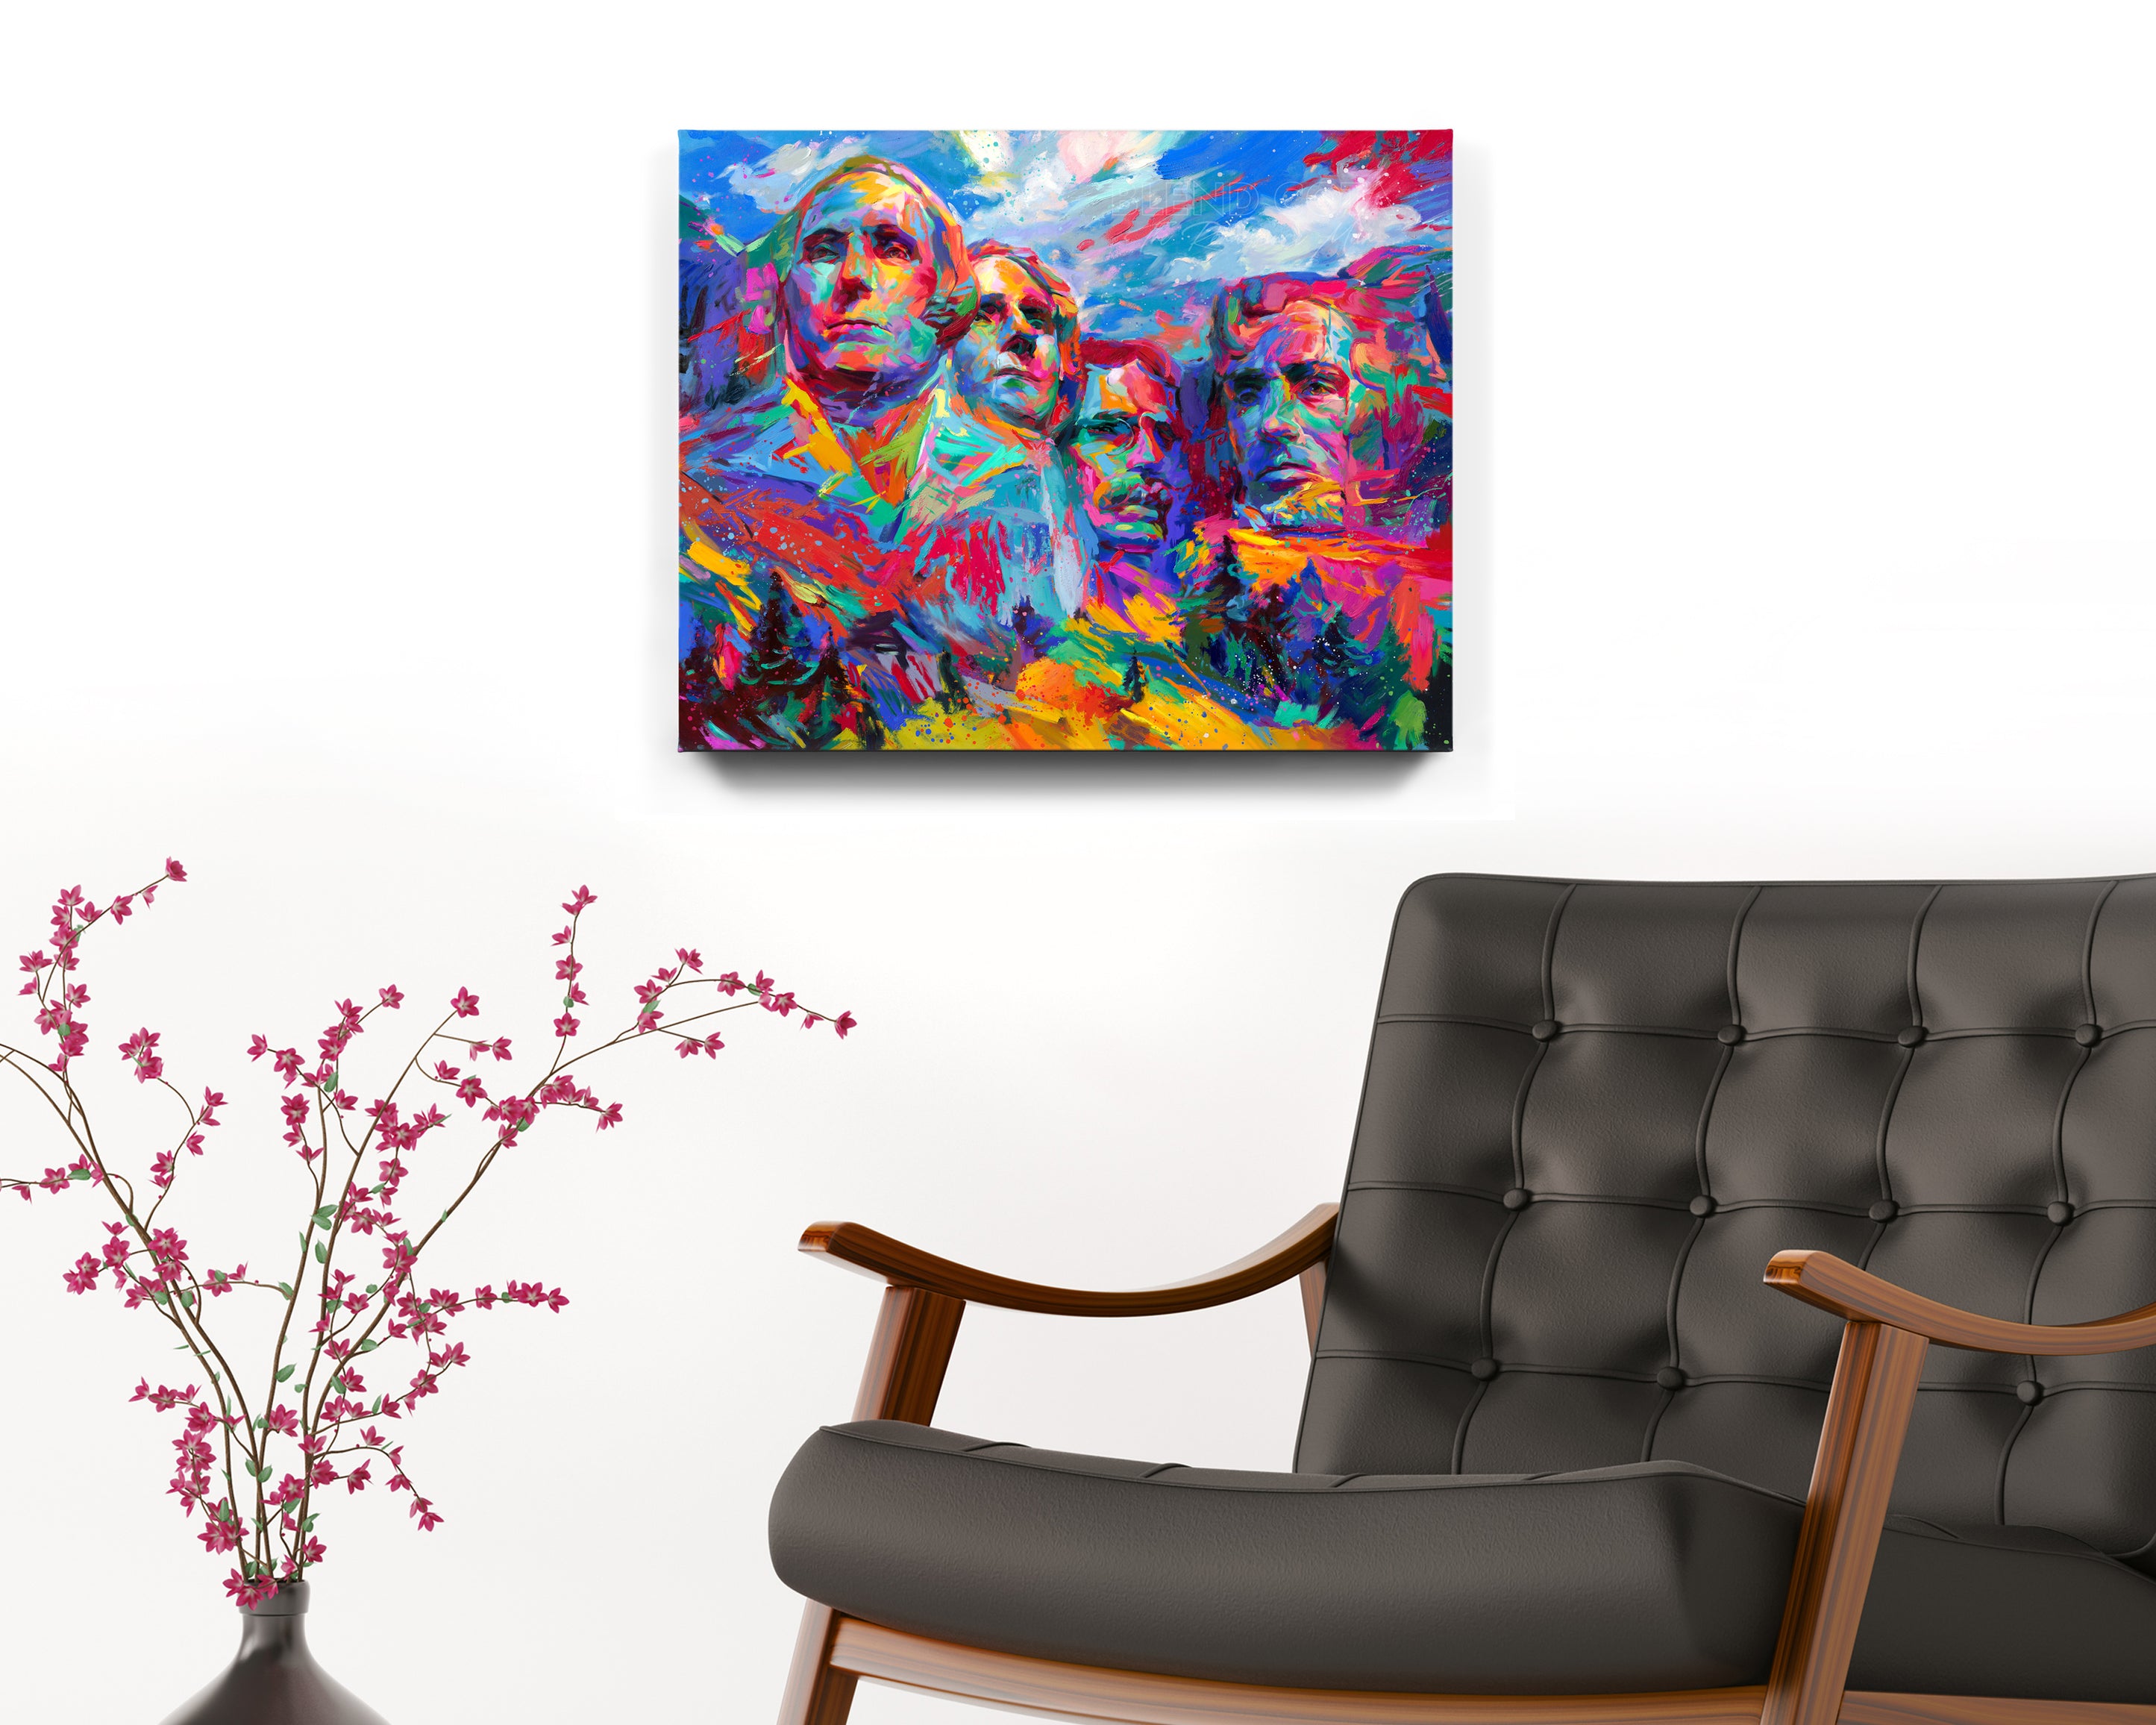 Mount Rushmore | Hope For a Brighter Future painted by Blend Cota Art Print framed on canvas from Blend Cota Studios with the painting hanging on a white wall behind a black leather armchair